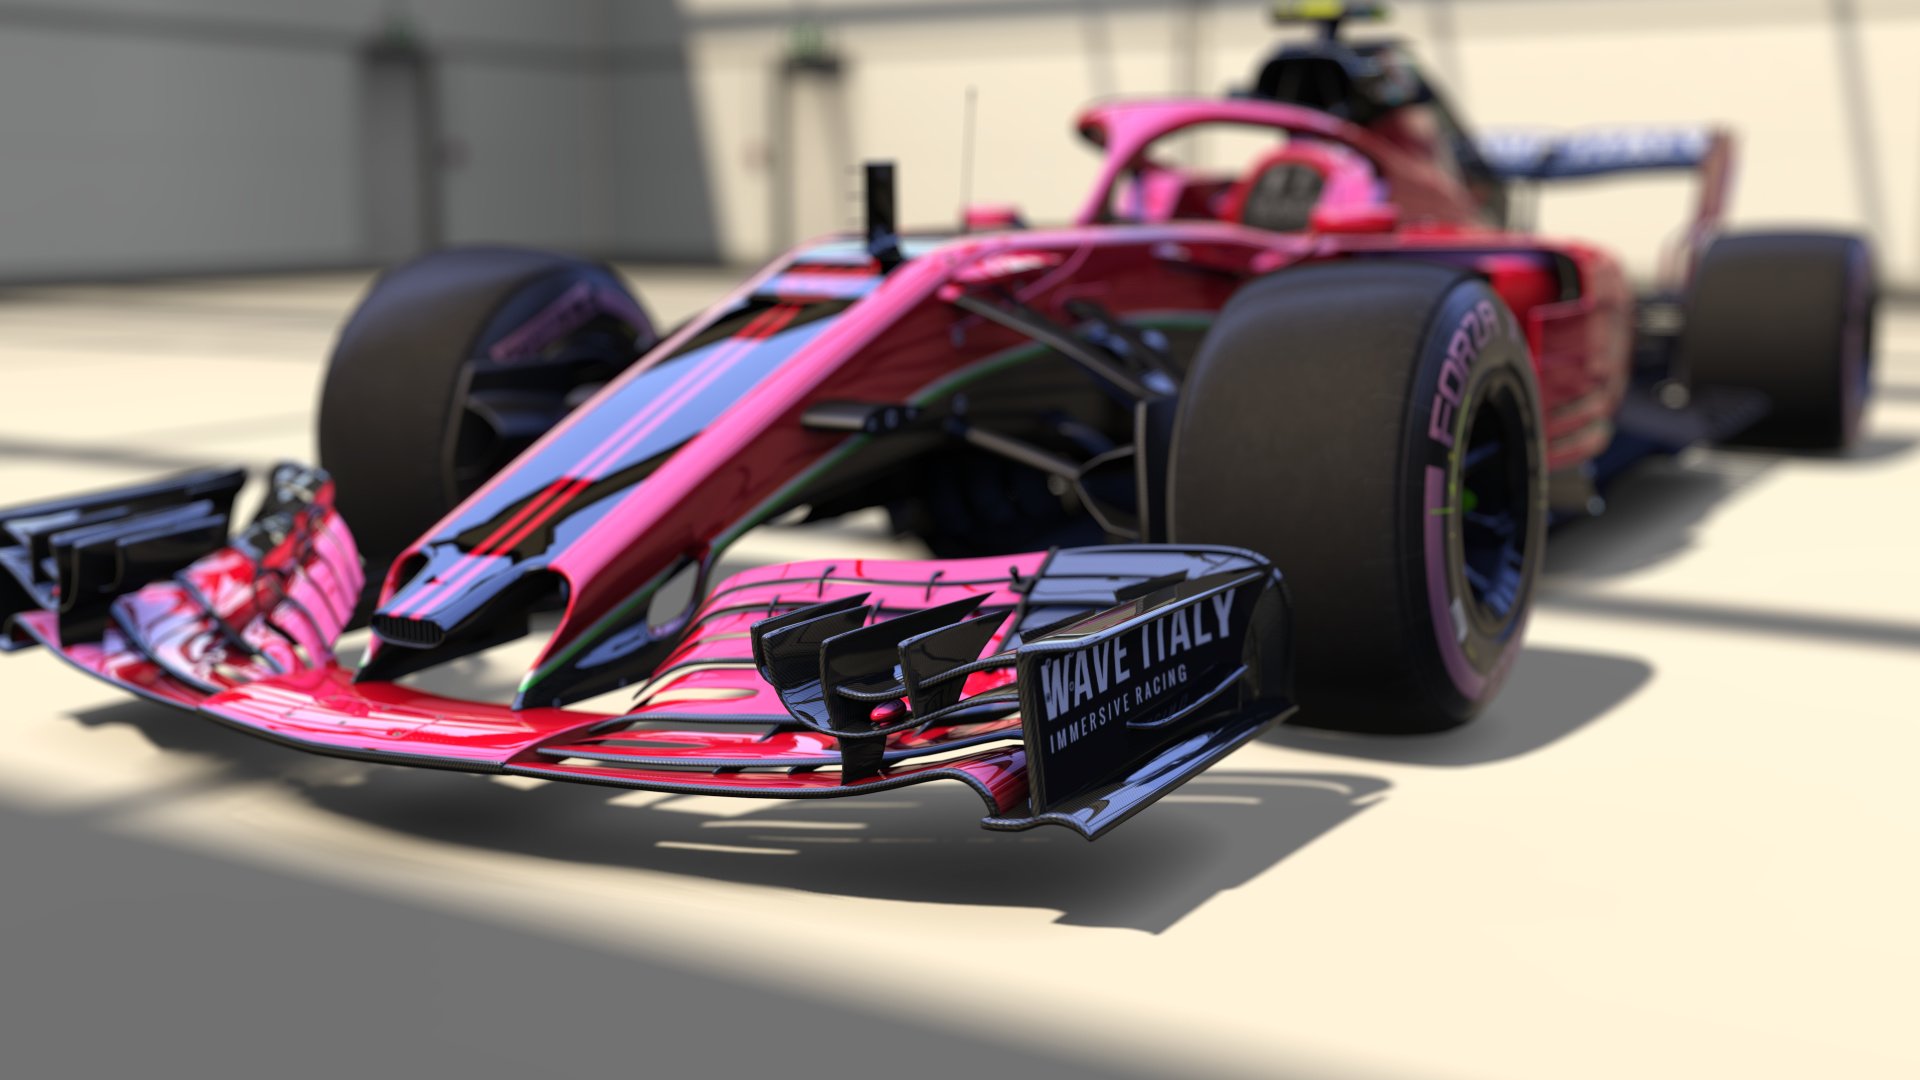 More information about "Assetto Corsa: Formula Hybrid 2018 by Race Sim Studio"